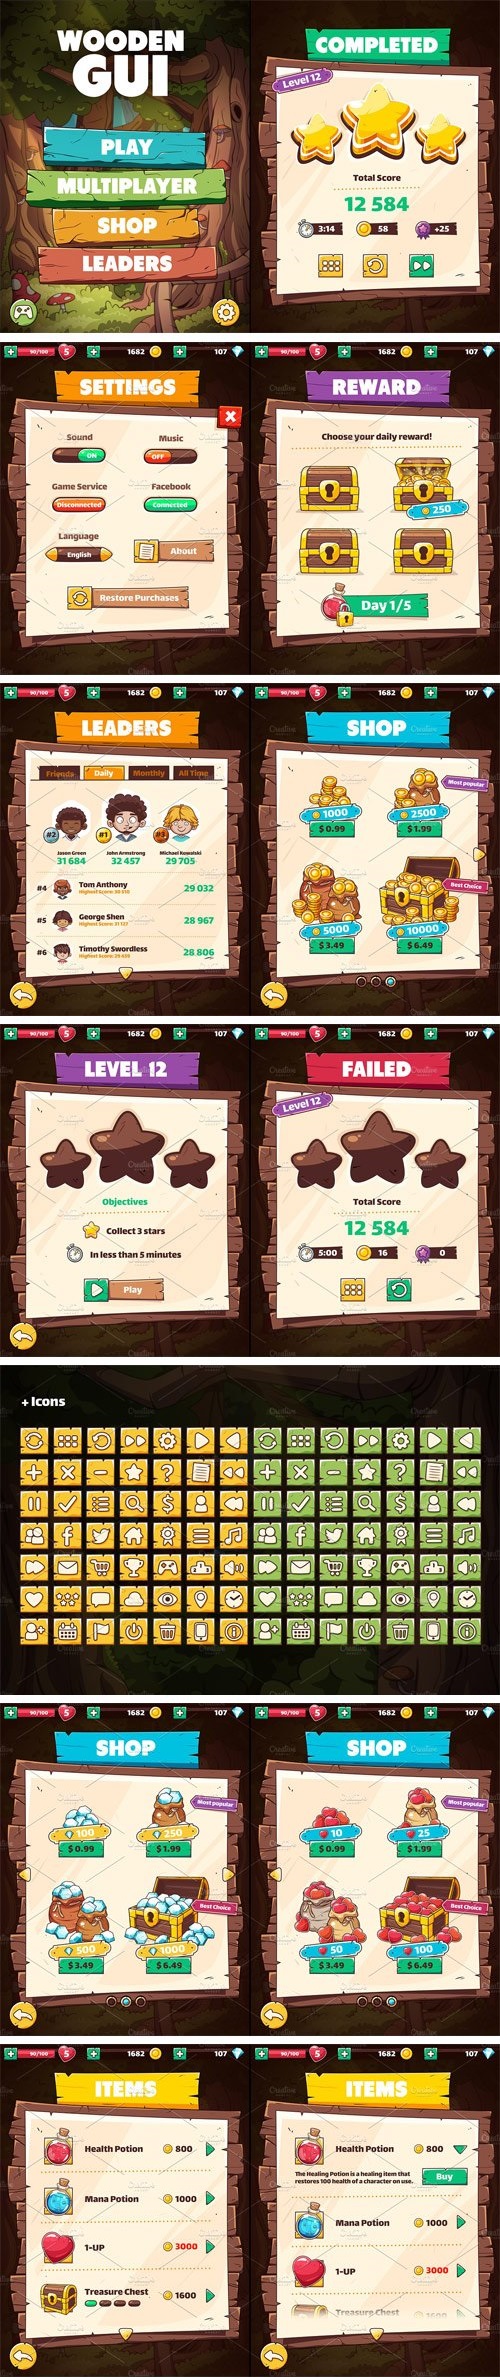 Wooden GUI for Mobile Game - 1527825